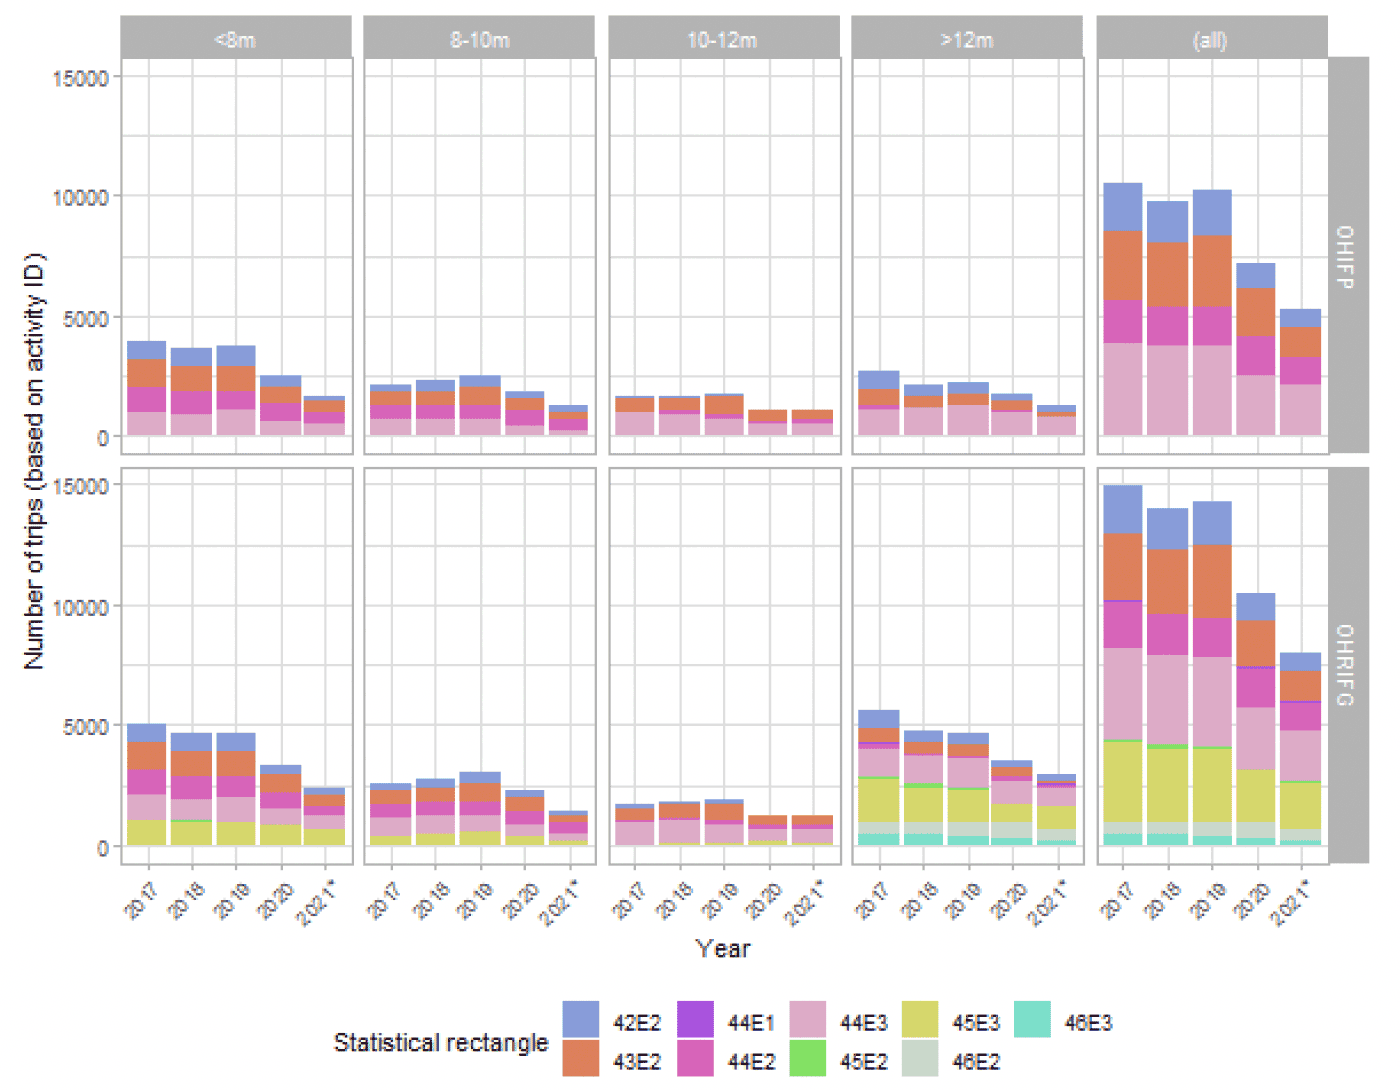 A series of bar graphs showing number of fishing trips made by vessels in different length categories within different ICES statistical rectangles, from 2017 to 2021 (inclusive), for the OHRIFG area and pilot area.